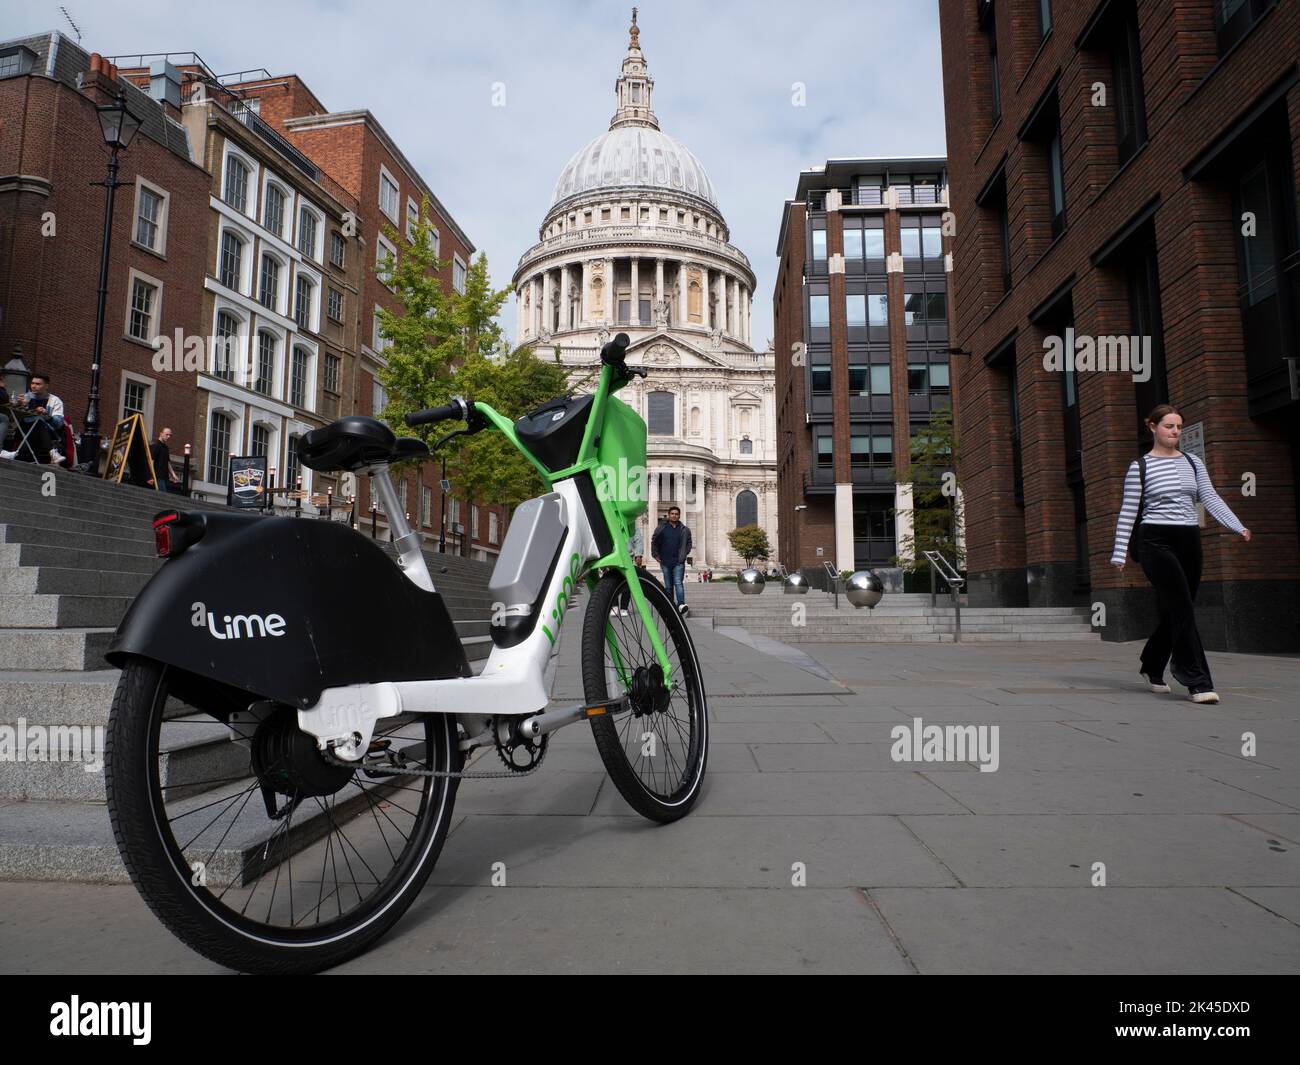 Lime Electric Verleih-E-Bike in der Nähe der St Pauls Cathedral, City of London, Stockfoto